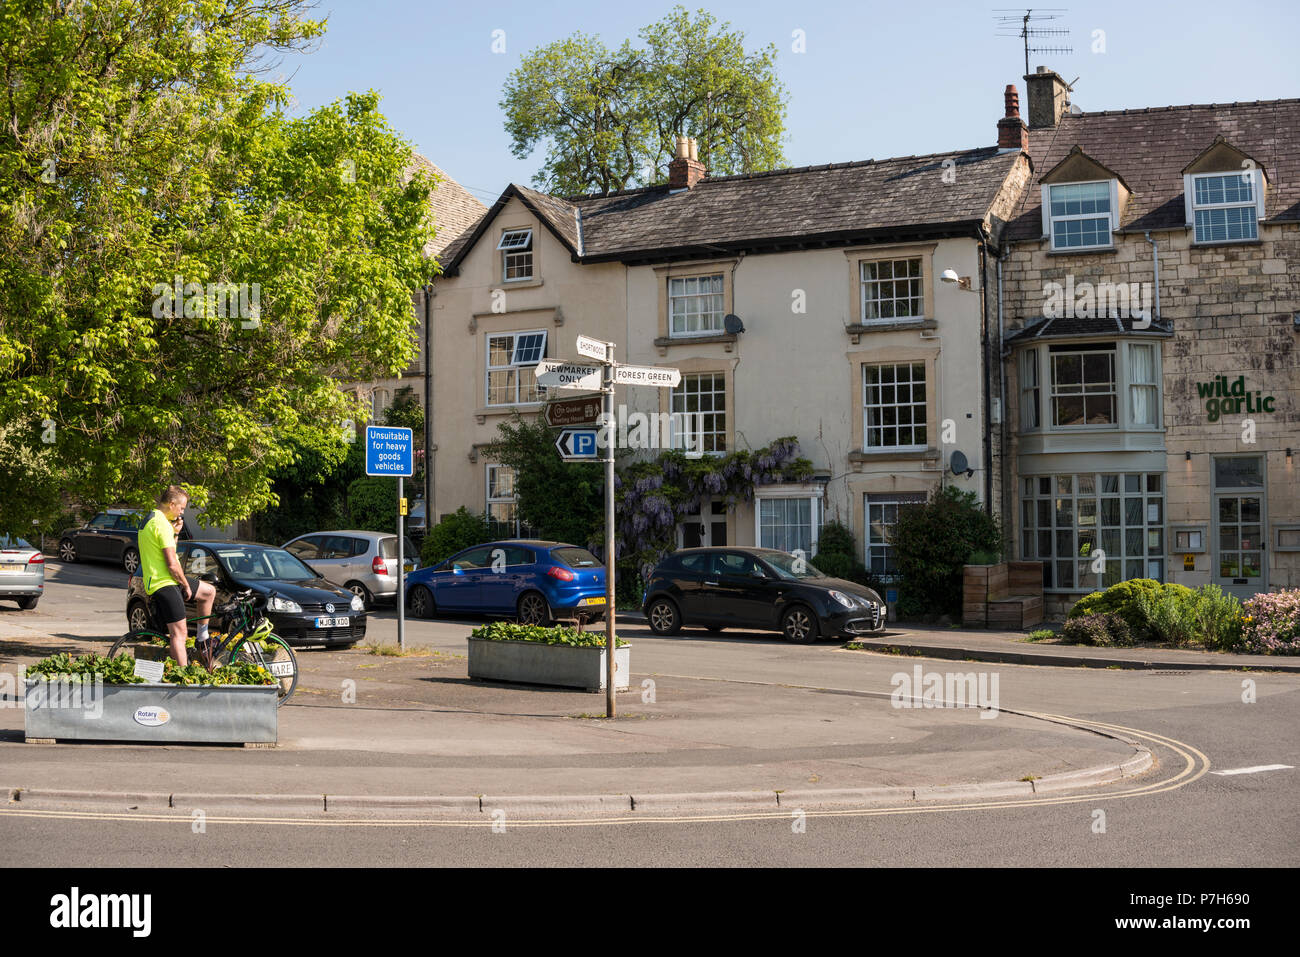 Town centre of Nailsworth, Gloucestershire, UK Stock Photo